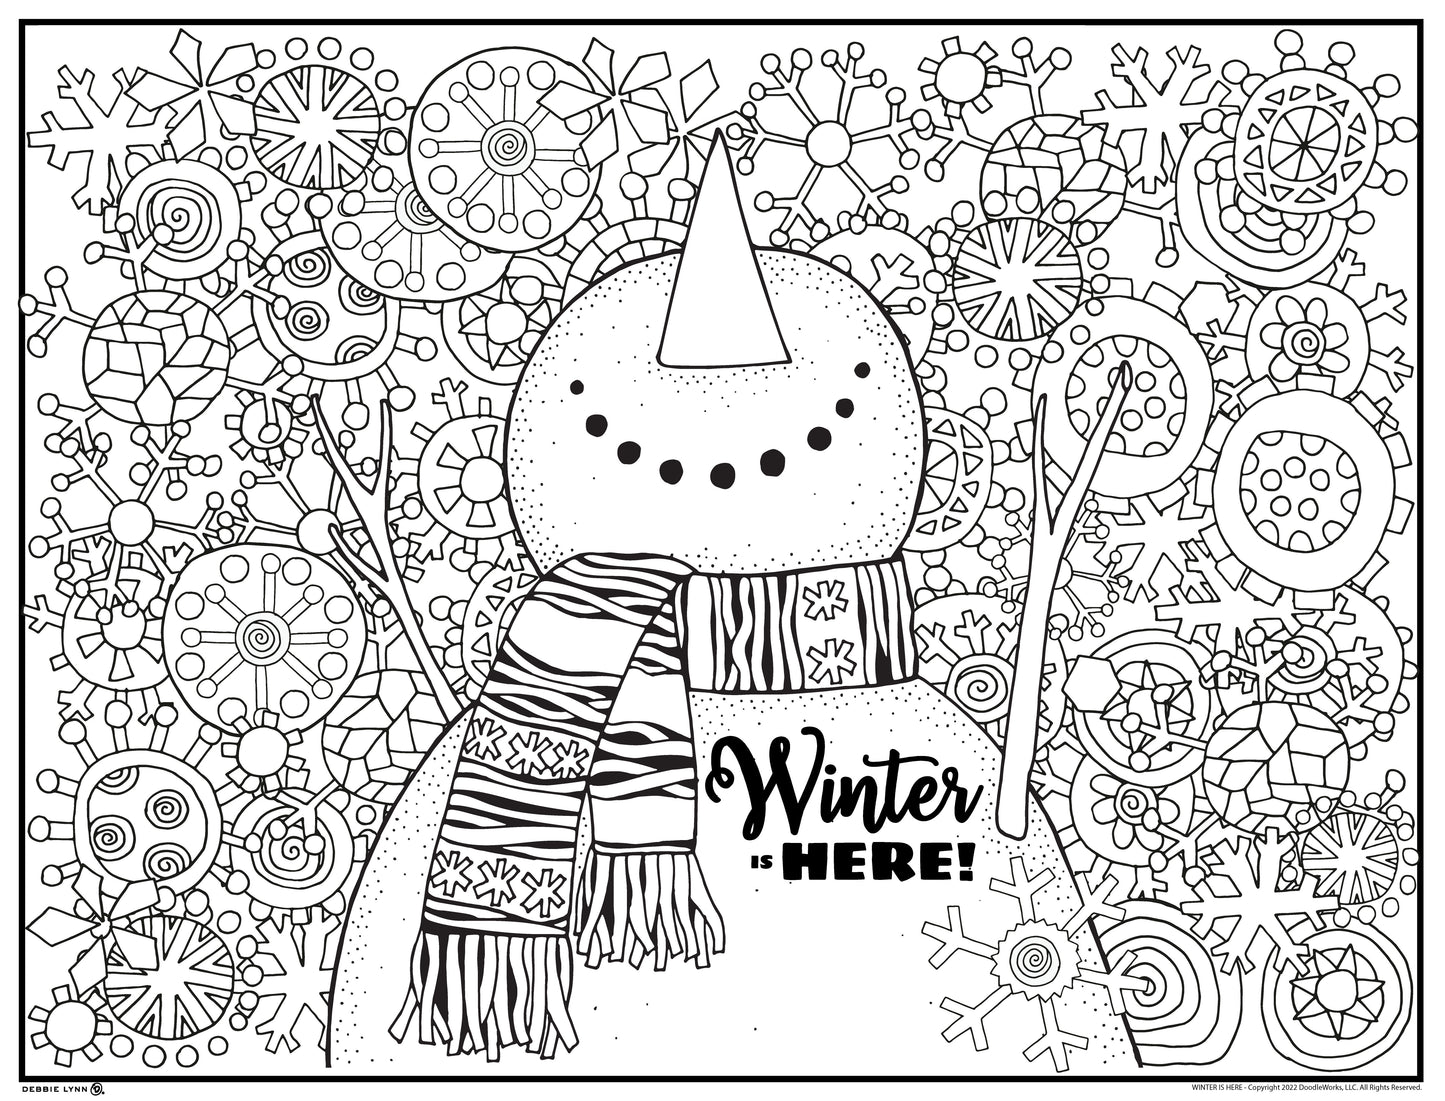 Winter is Here! Personalized Giant Coloring Poster 46"x60"